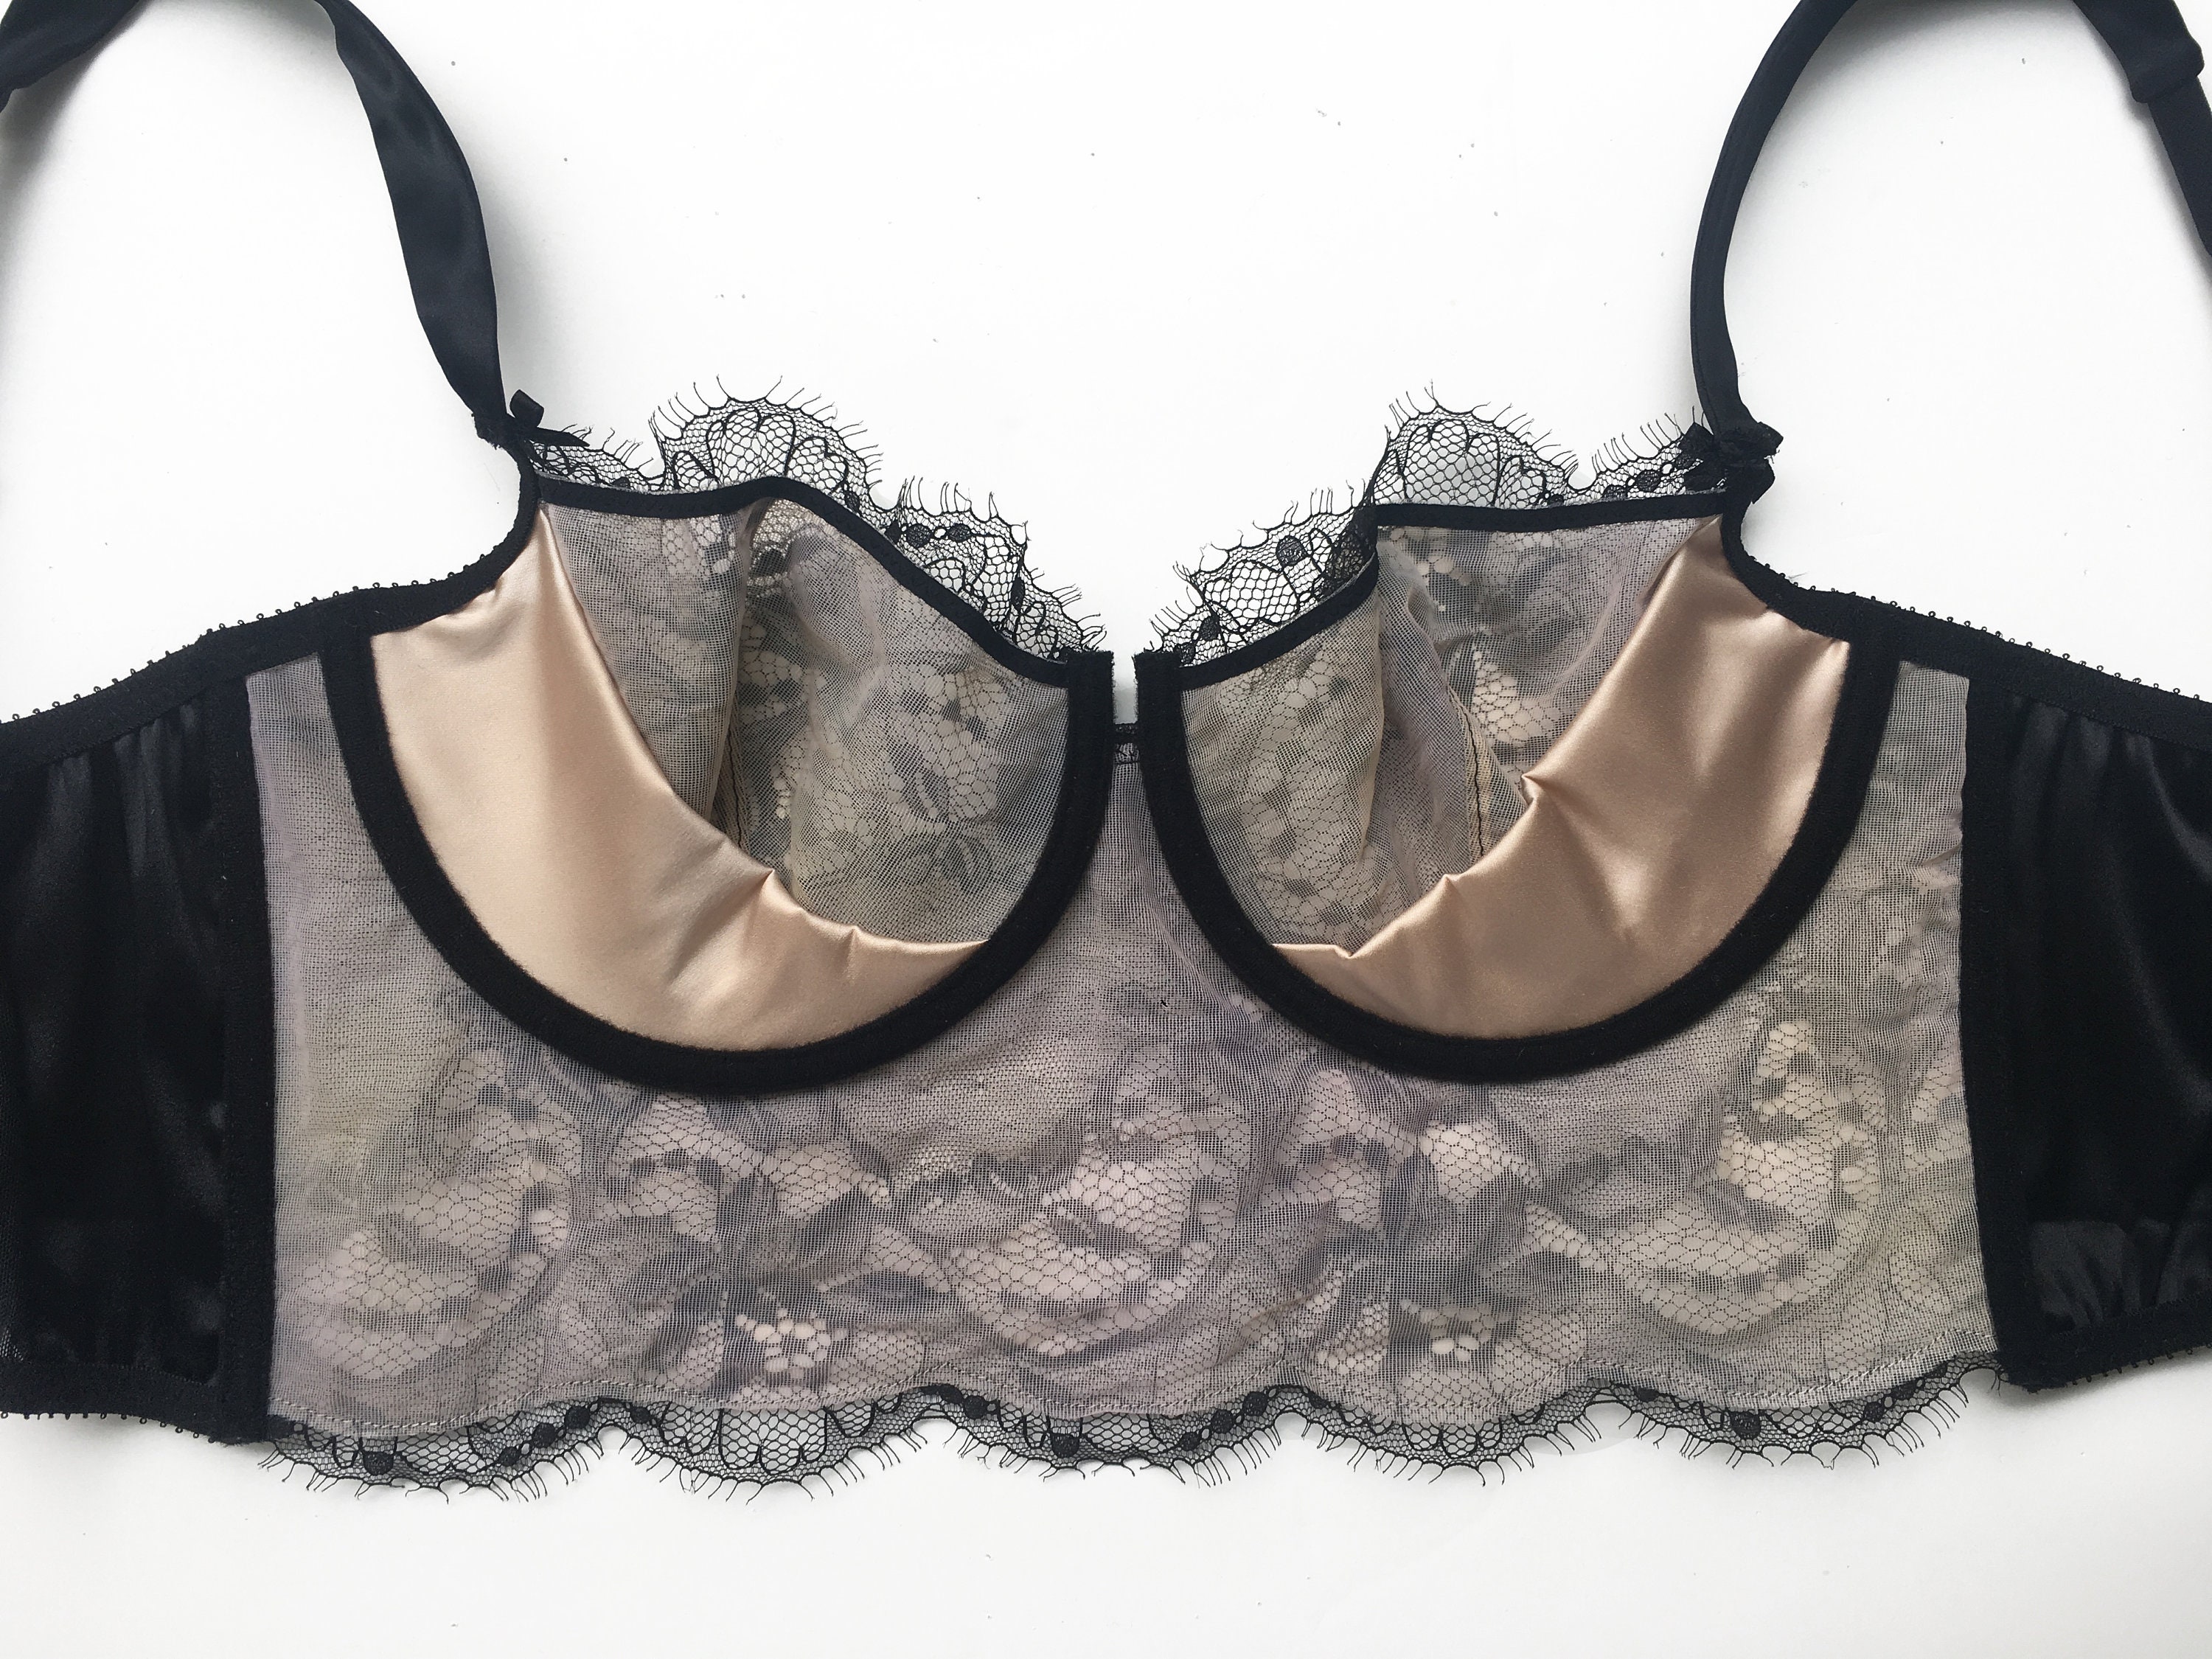 Lace longline bra in black French Chantilly lace and nude lining